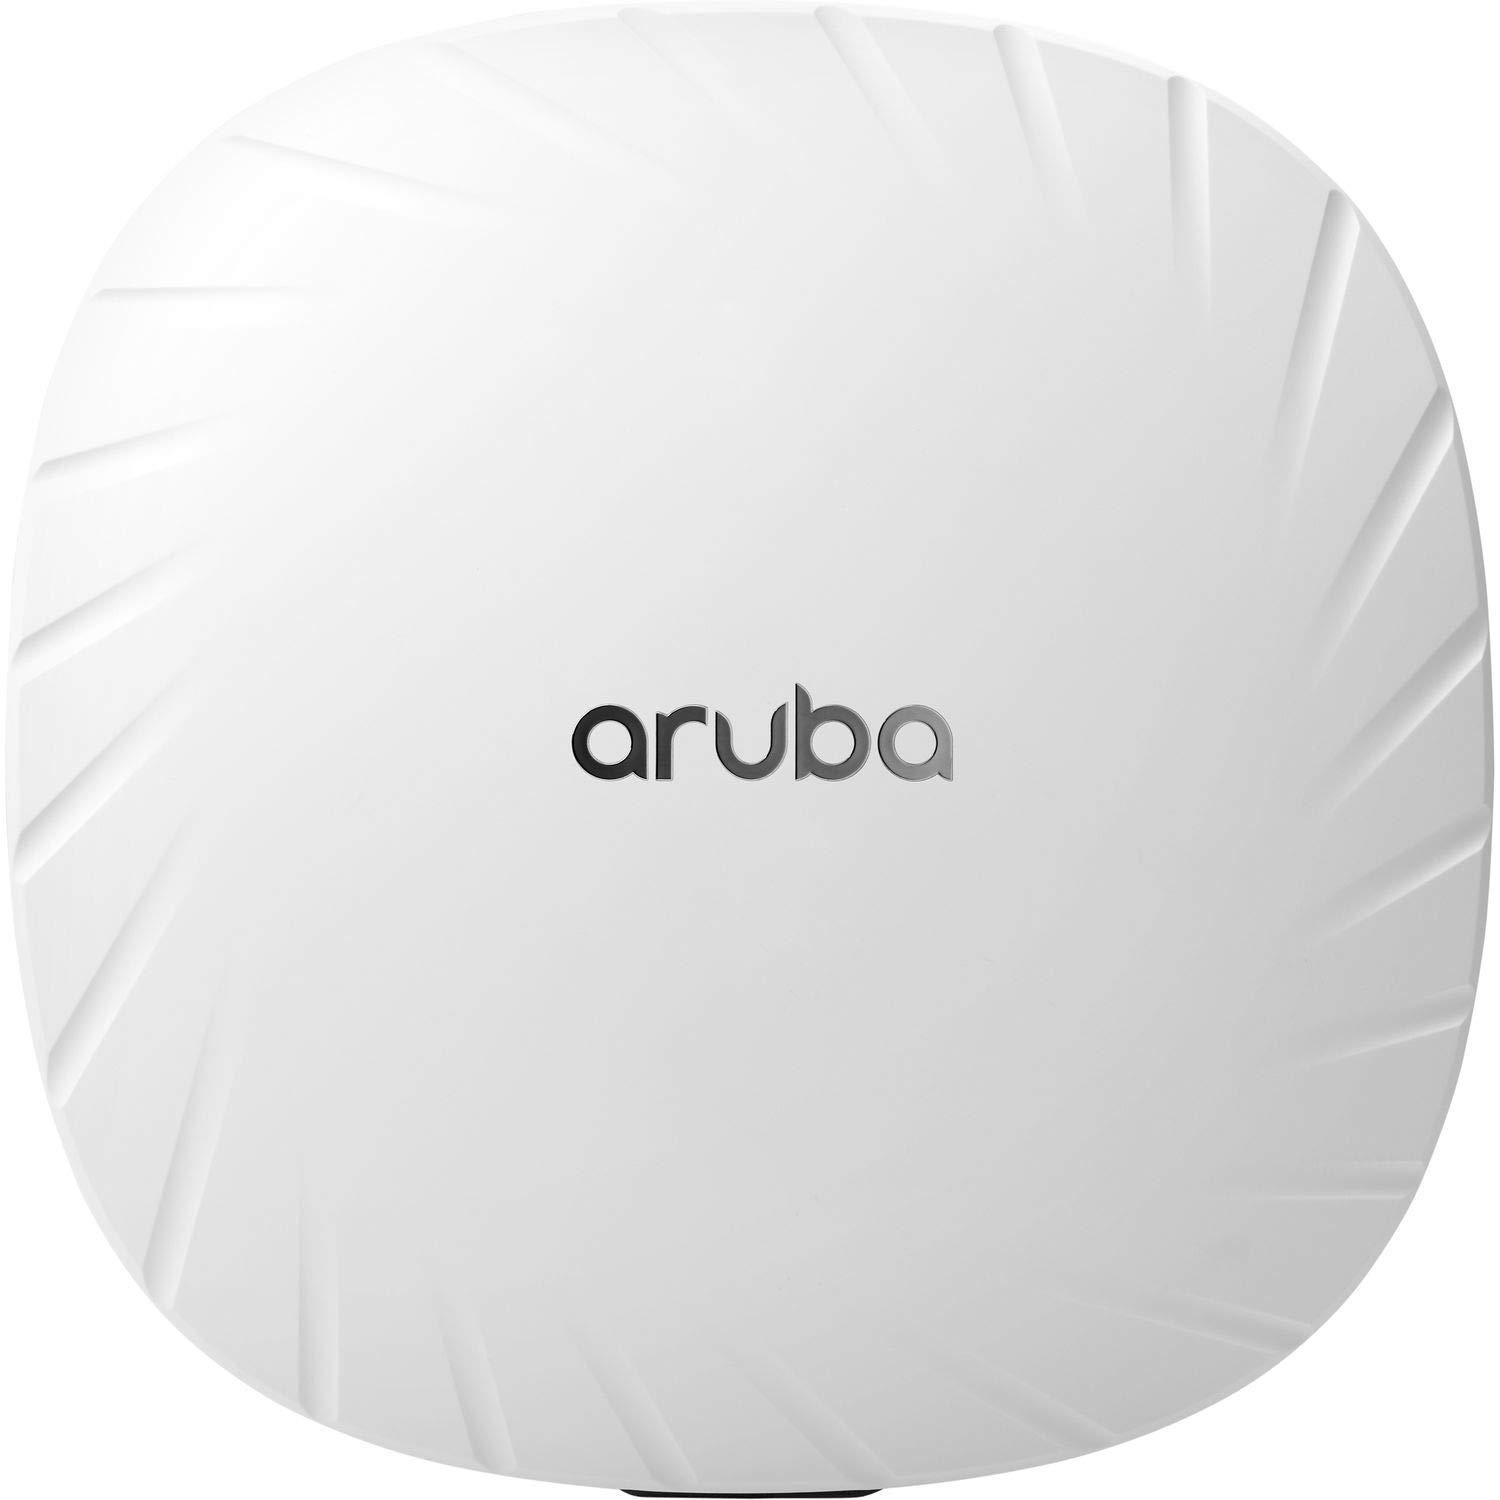 HPE | Q9H63A | Aruba AP-515 (US) Dual Radio 4x4: 4 + 2x2: 2 802.11Ax (4.8Gbps in 5GHz 575Mbps in The 2.4GHz Band) Internal Antennas Unified Campus Ap Access Point